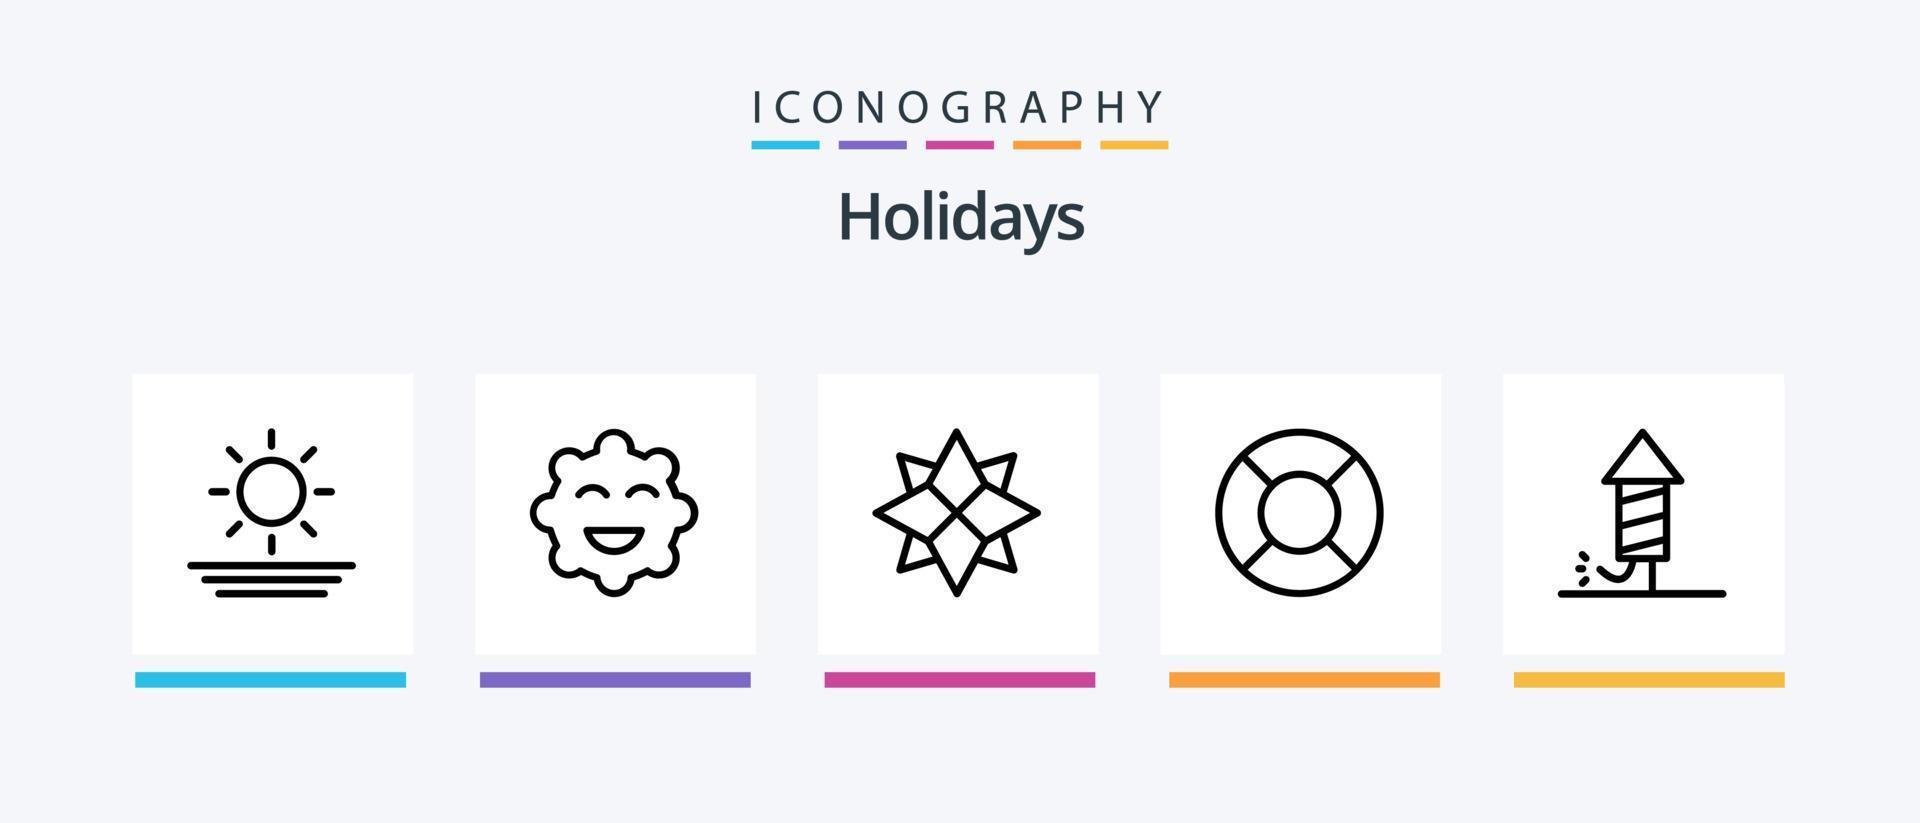 Holidays Line 5 Icon Pack Including . present. holiday. gift. xmas. Creative Icons Design vector